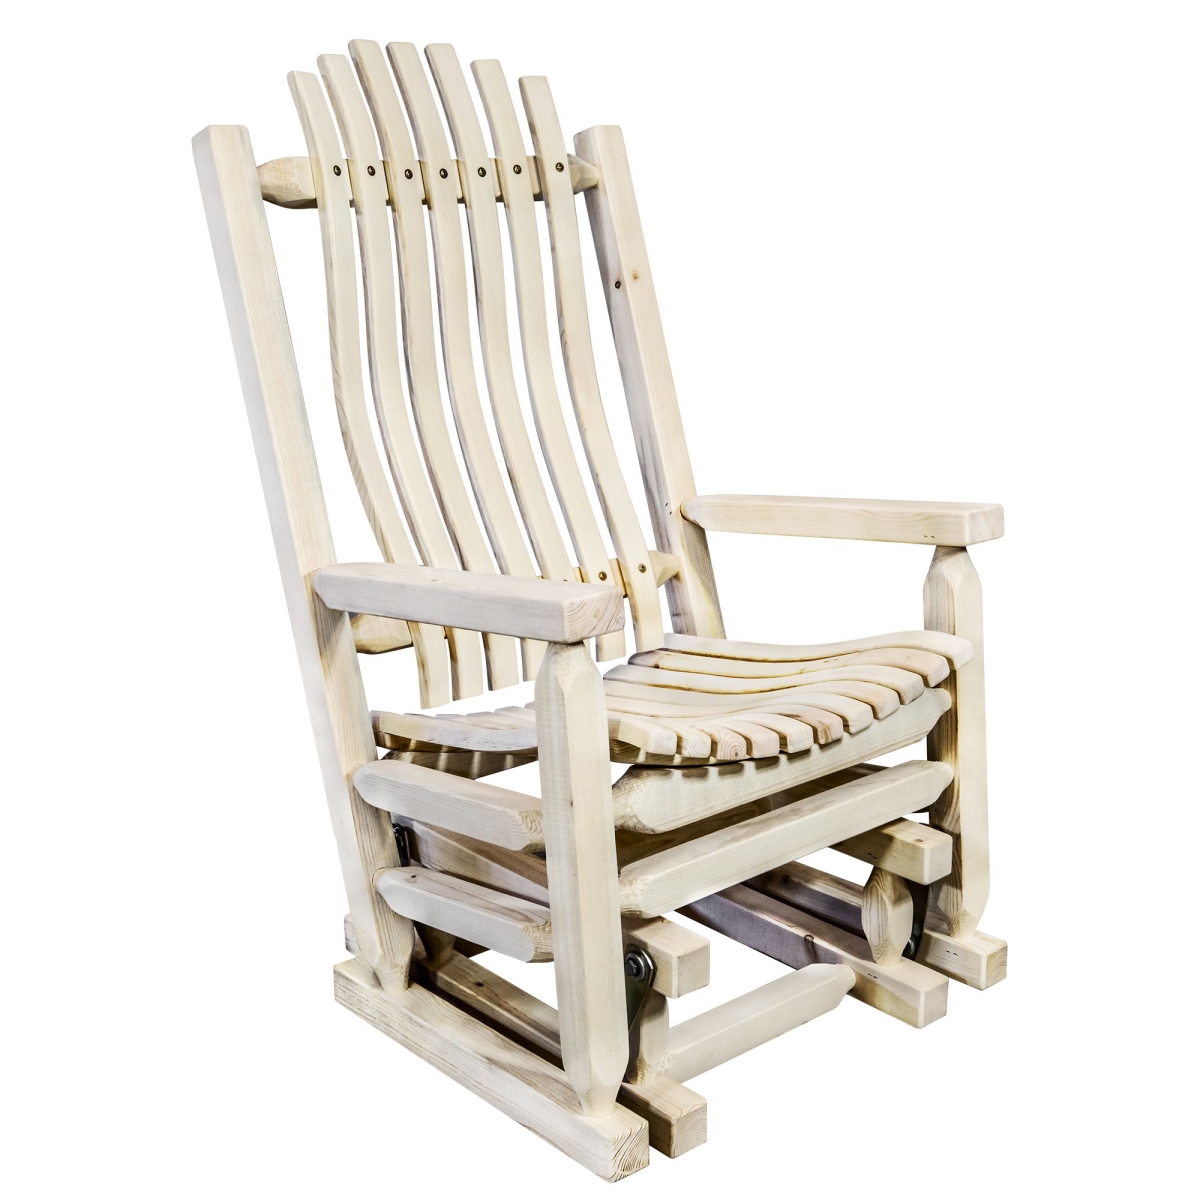 Montana Woodworks MWHCGRV Homestead Collection Glider Rocker, Clear Lacquer Finish